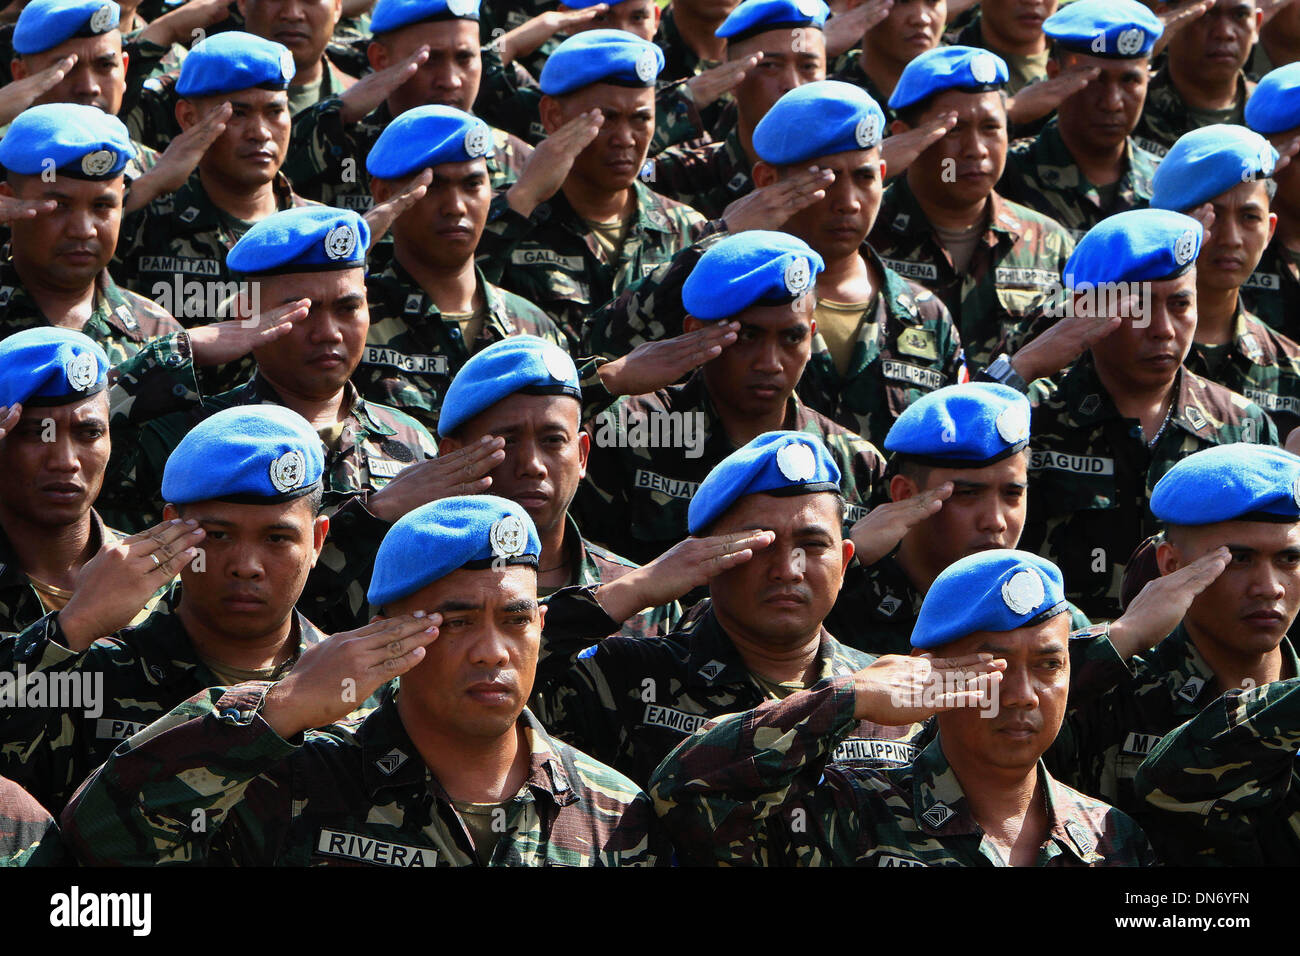 Quezon City, Philippines. 20th Dec, 2013. Soldiers from the UN Peacekeepers of the Armed Forces of the Philippines (AFP) salute during the celebration of the 78th anniversary of AFP at Camp Aguinaldo in Quezon City, the Philippines, Dec. 20, 2013. Credit:  Rouelle Umali/Xinhua/Alamy Live News Stock Photo